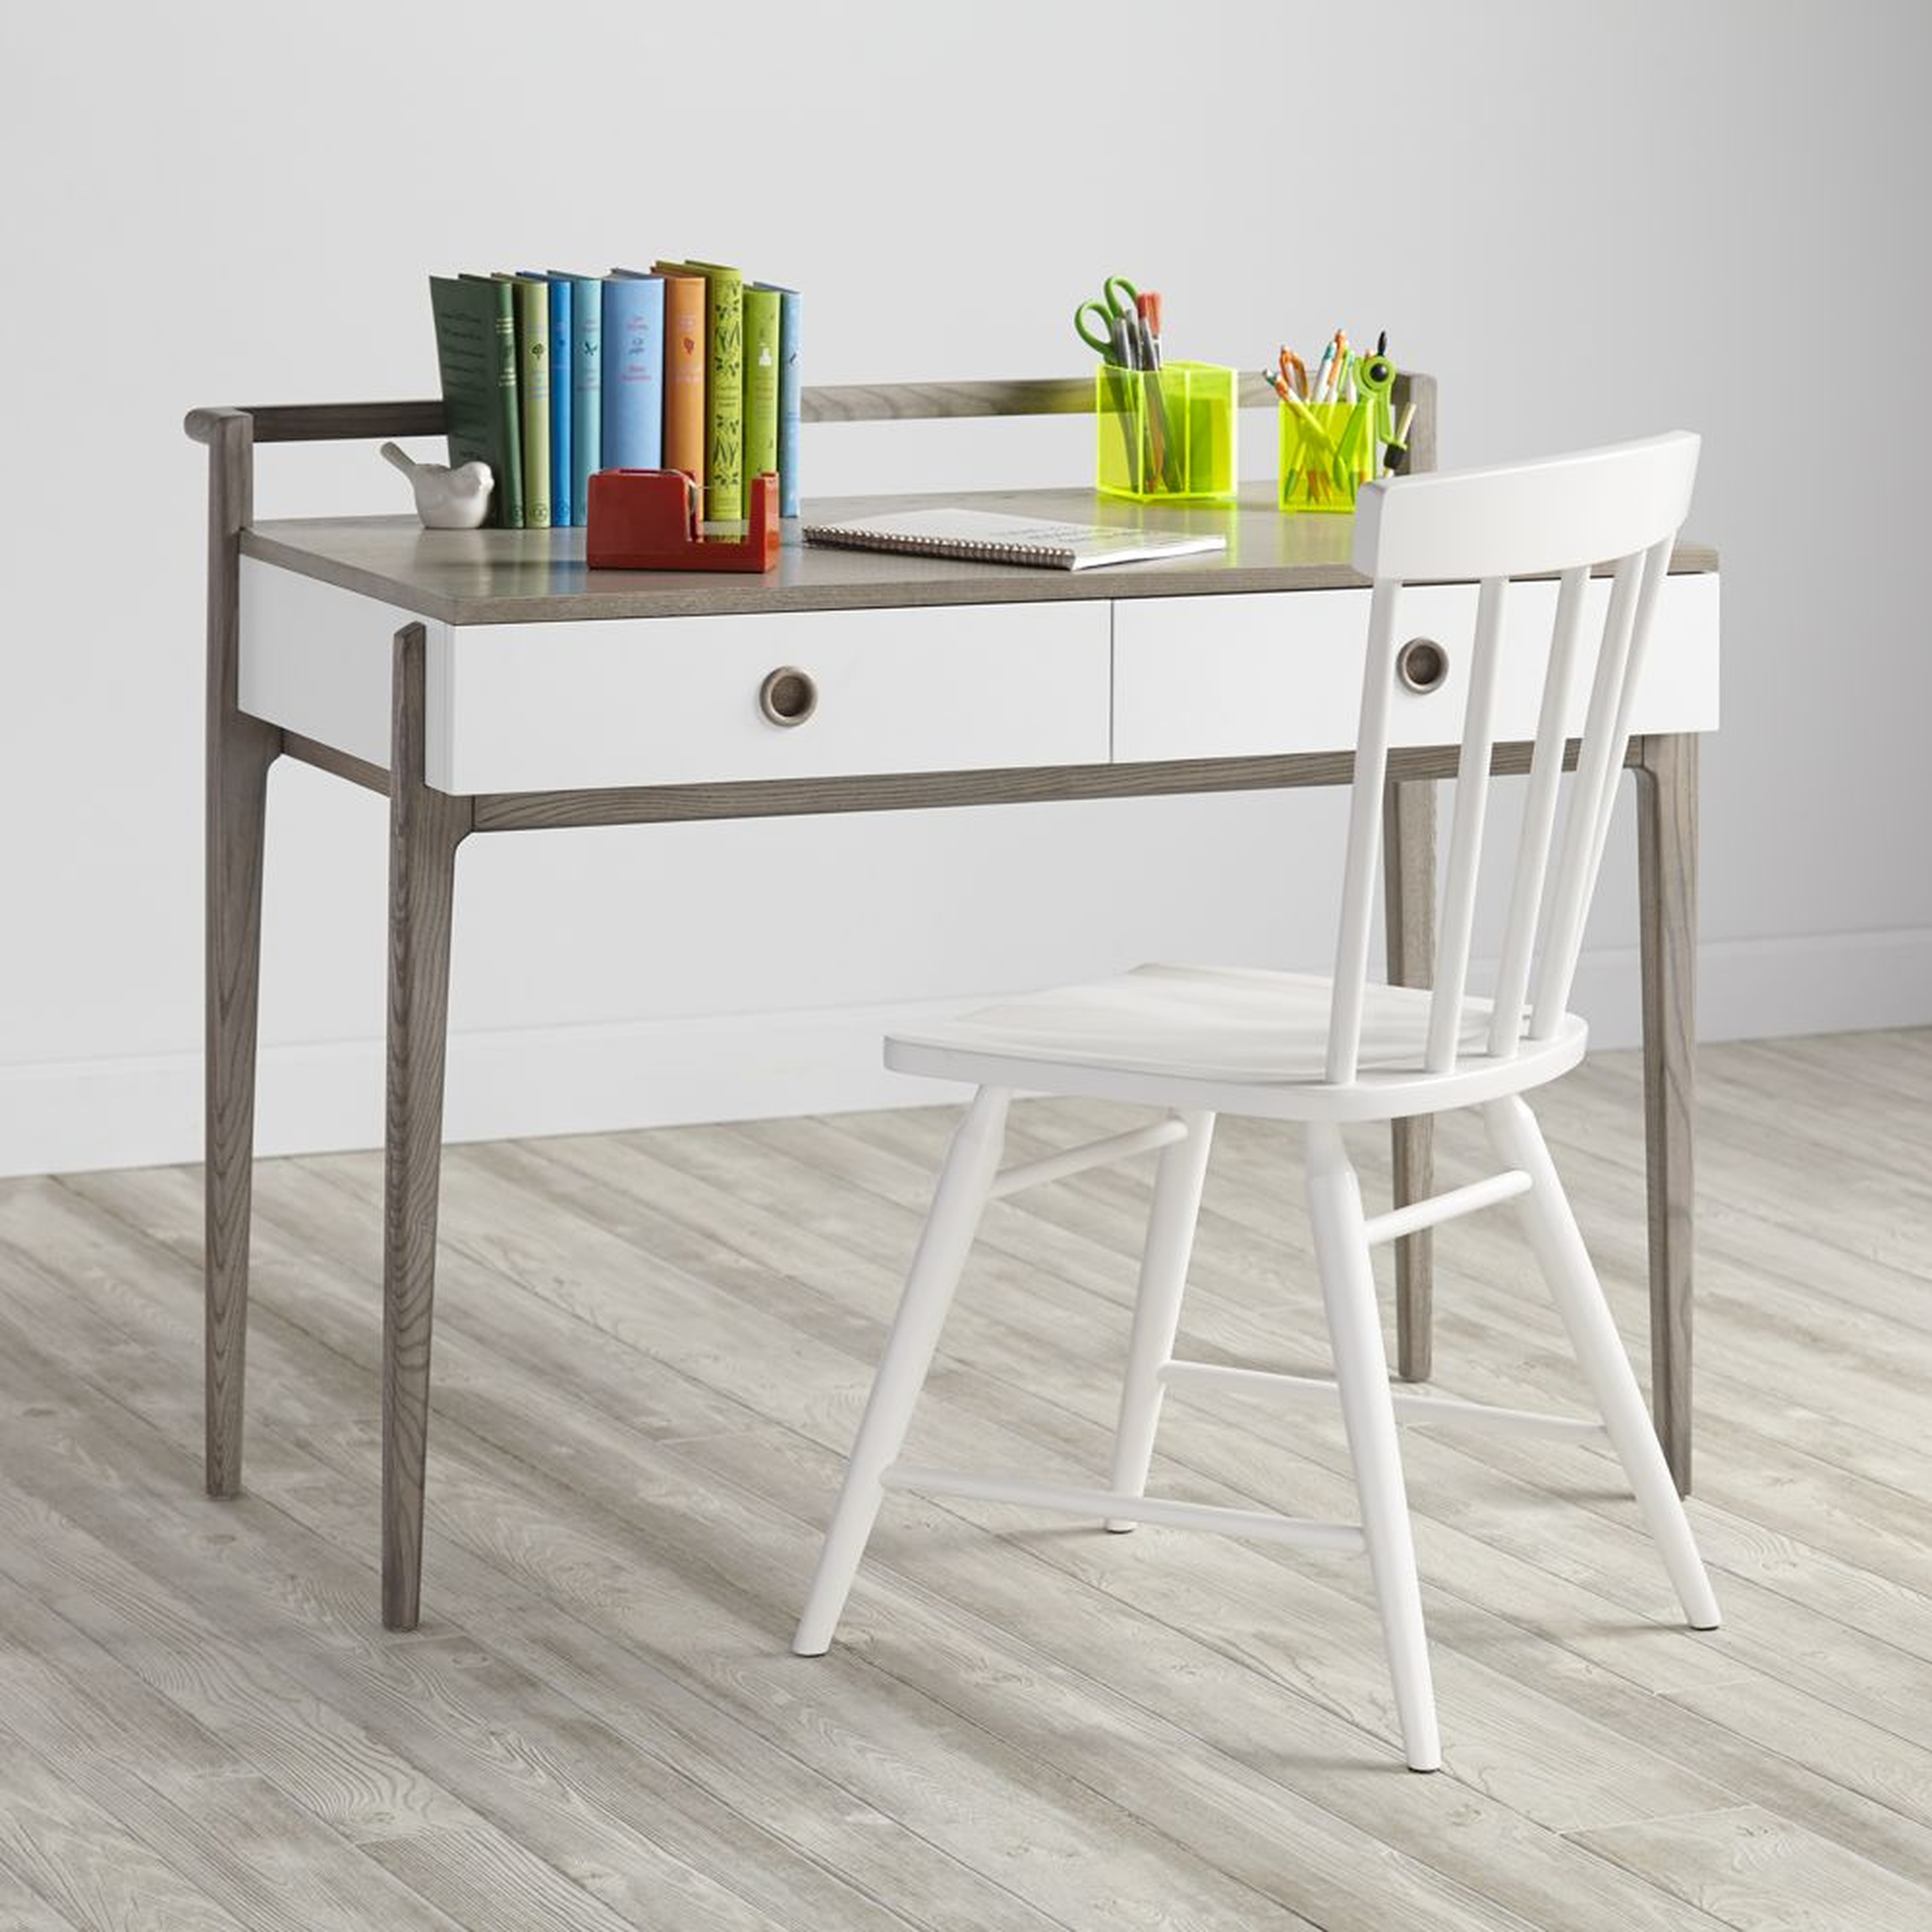 Kids Wrightwood Grey Stain and White Desk - Crate and Barrel